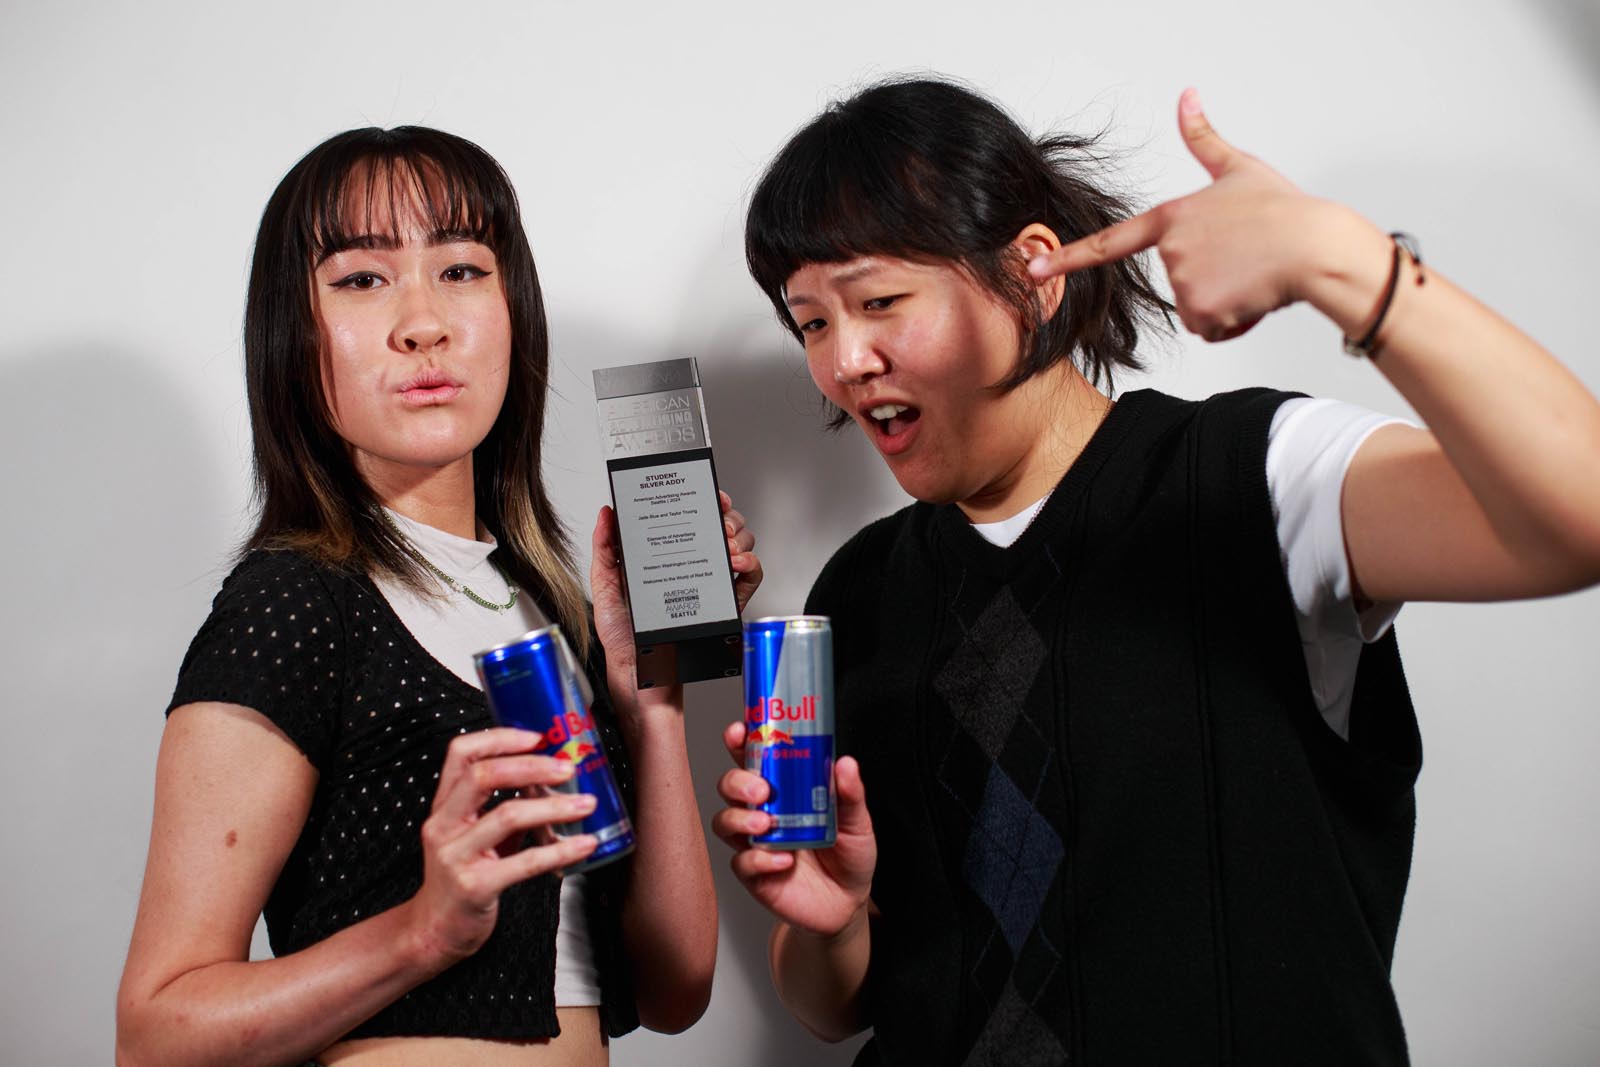 two design students hold a trophy and cans of Red Bull